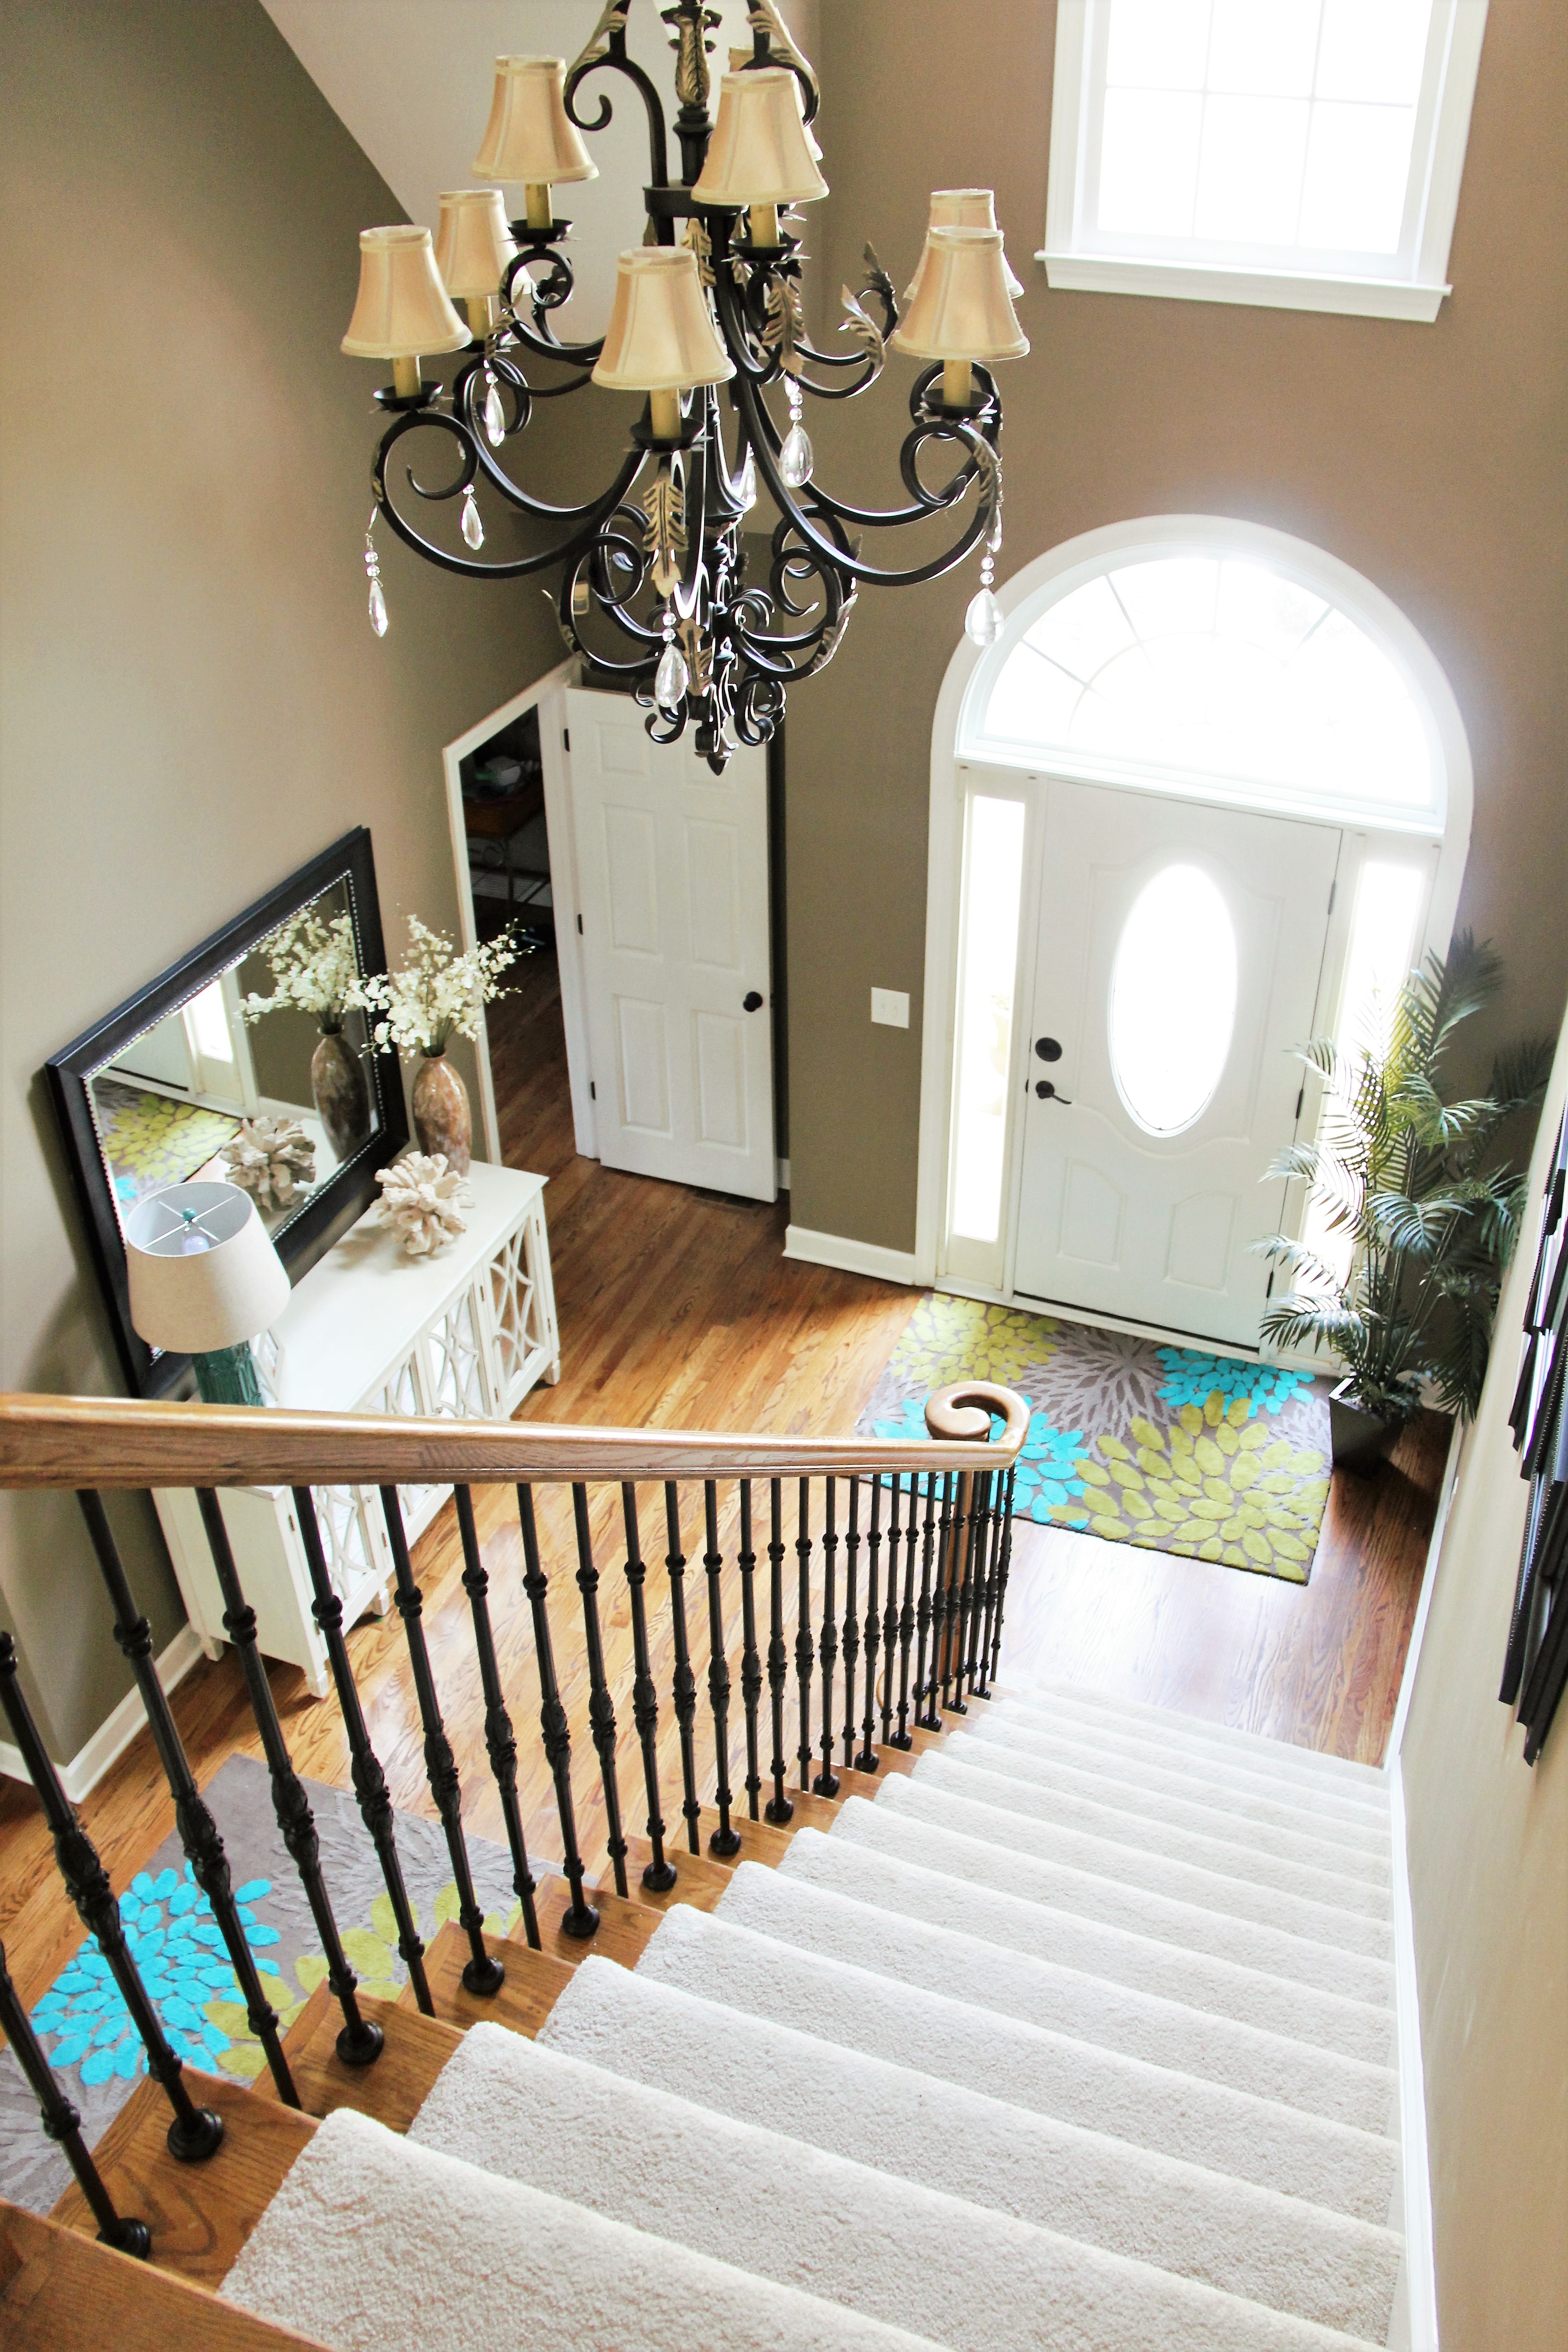 Let your "House Style" begin with your Foyer